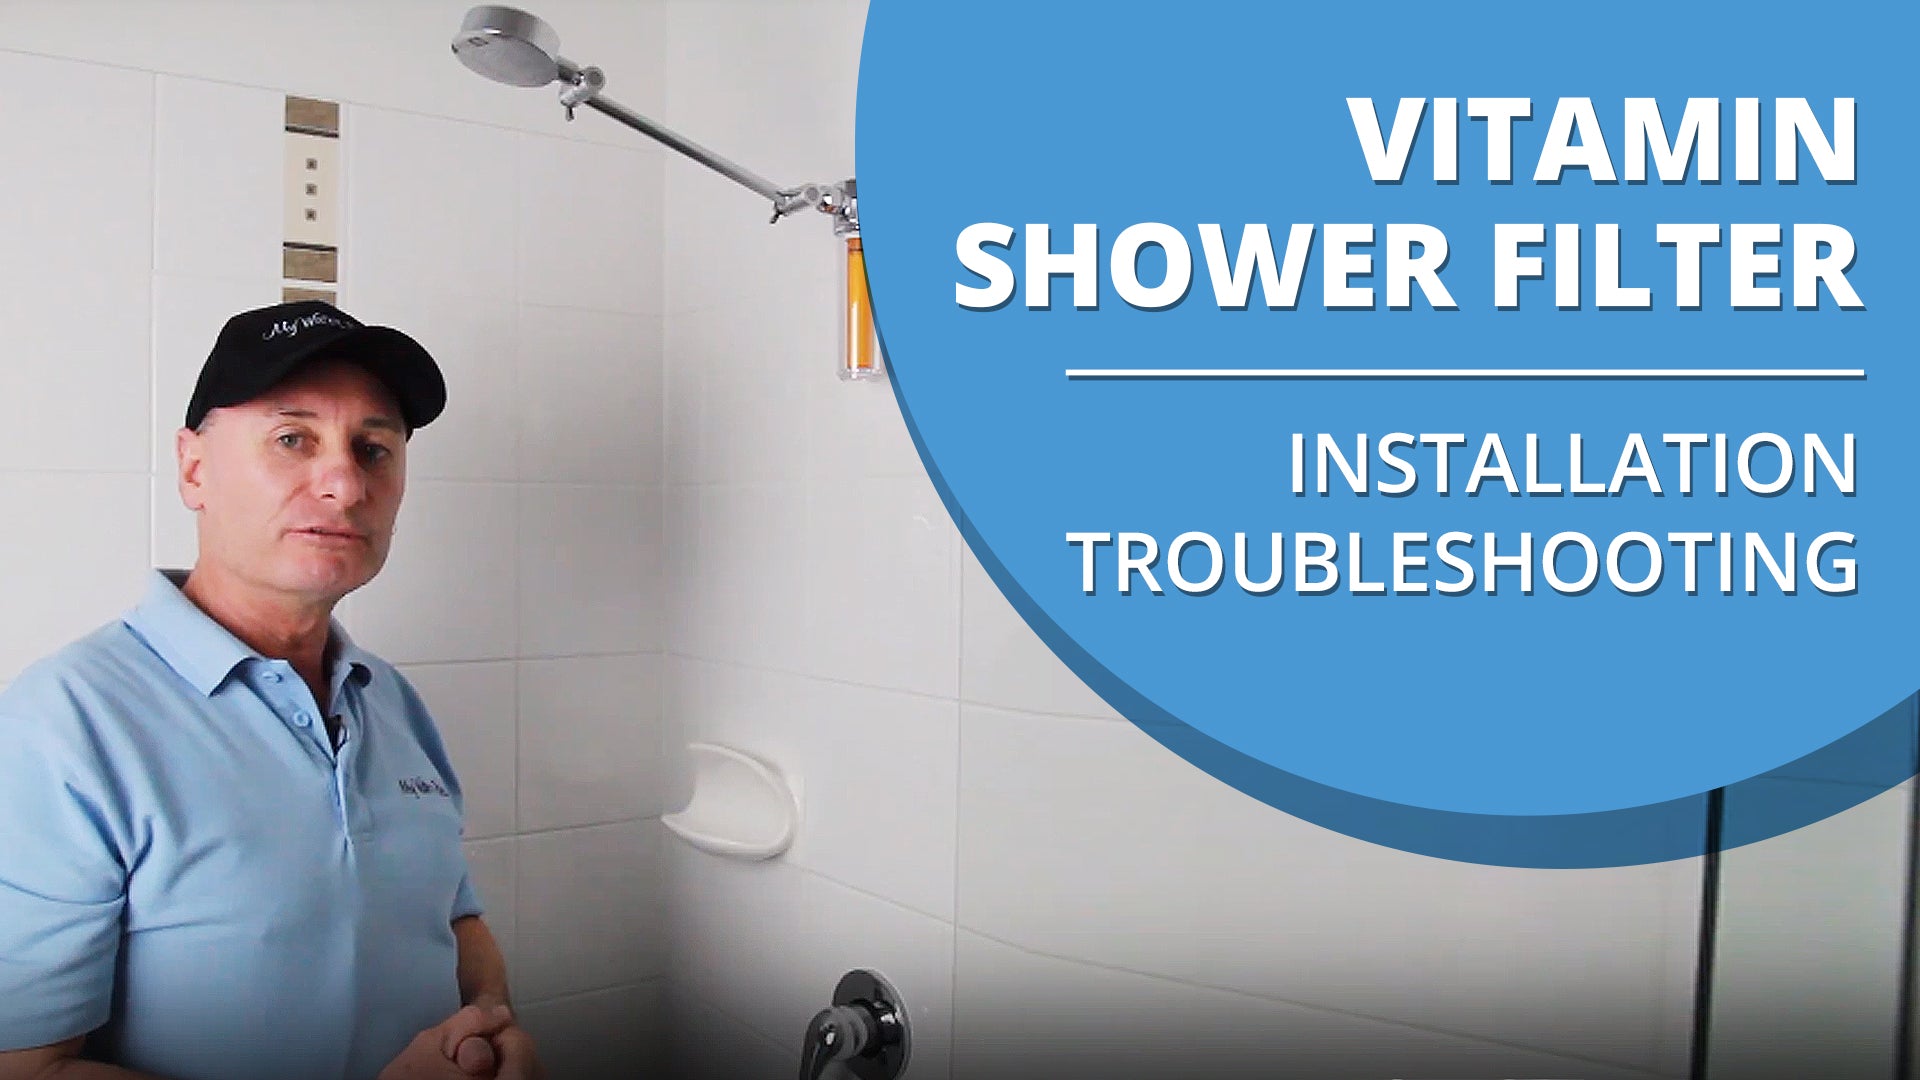 Why is there no water coming out of my Vitamin Shower Head? [VIDEO]